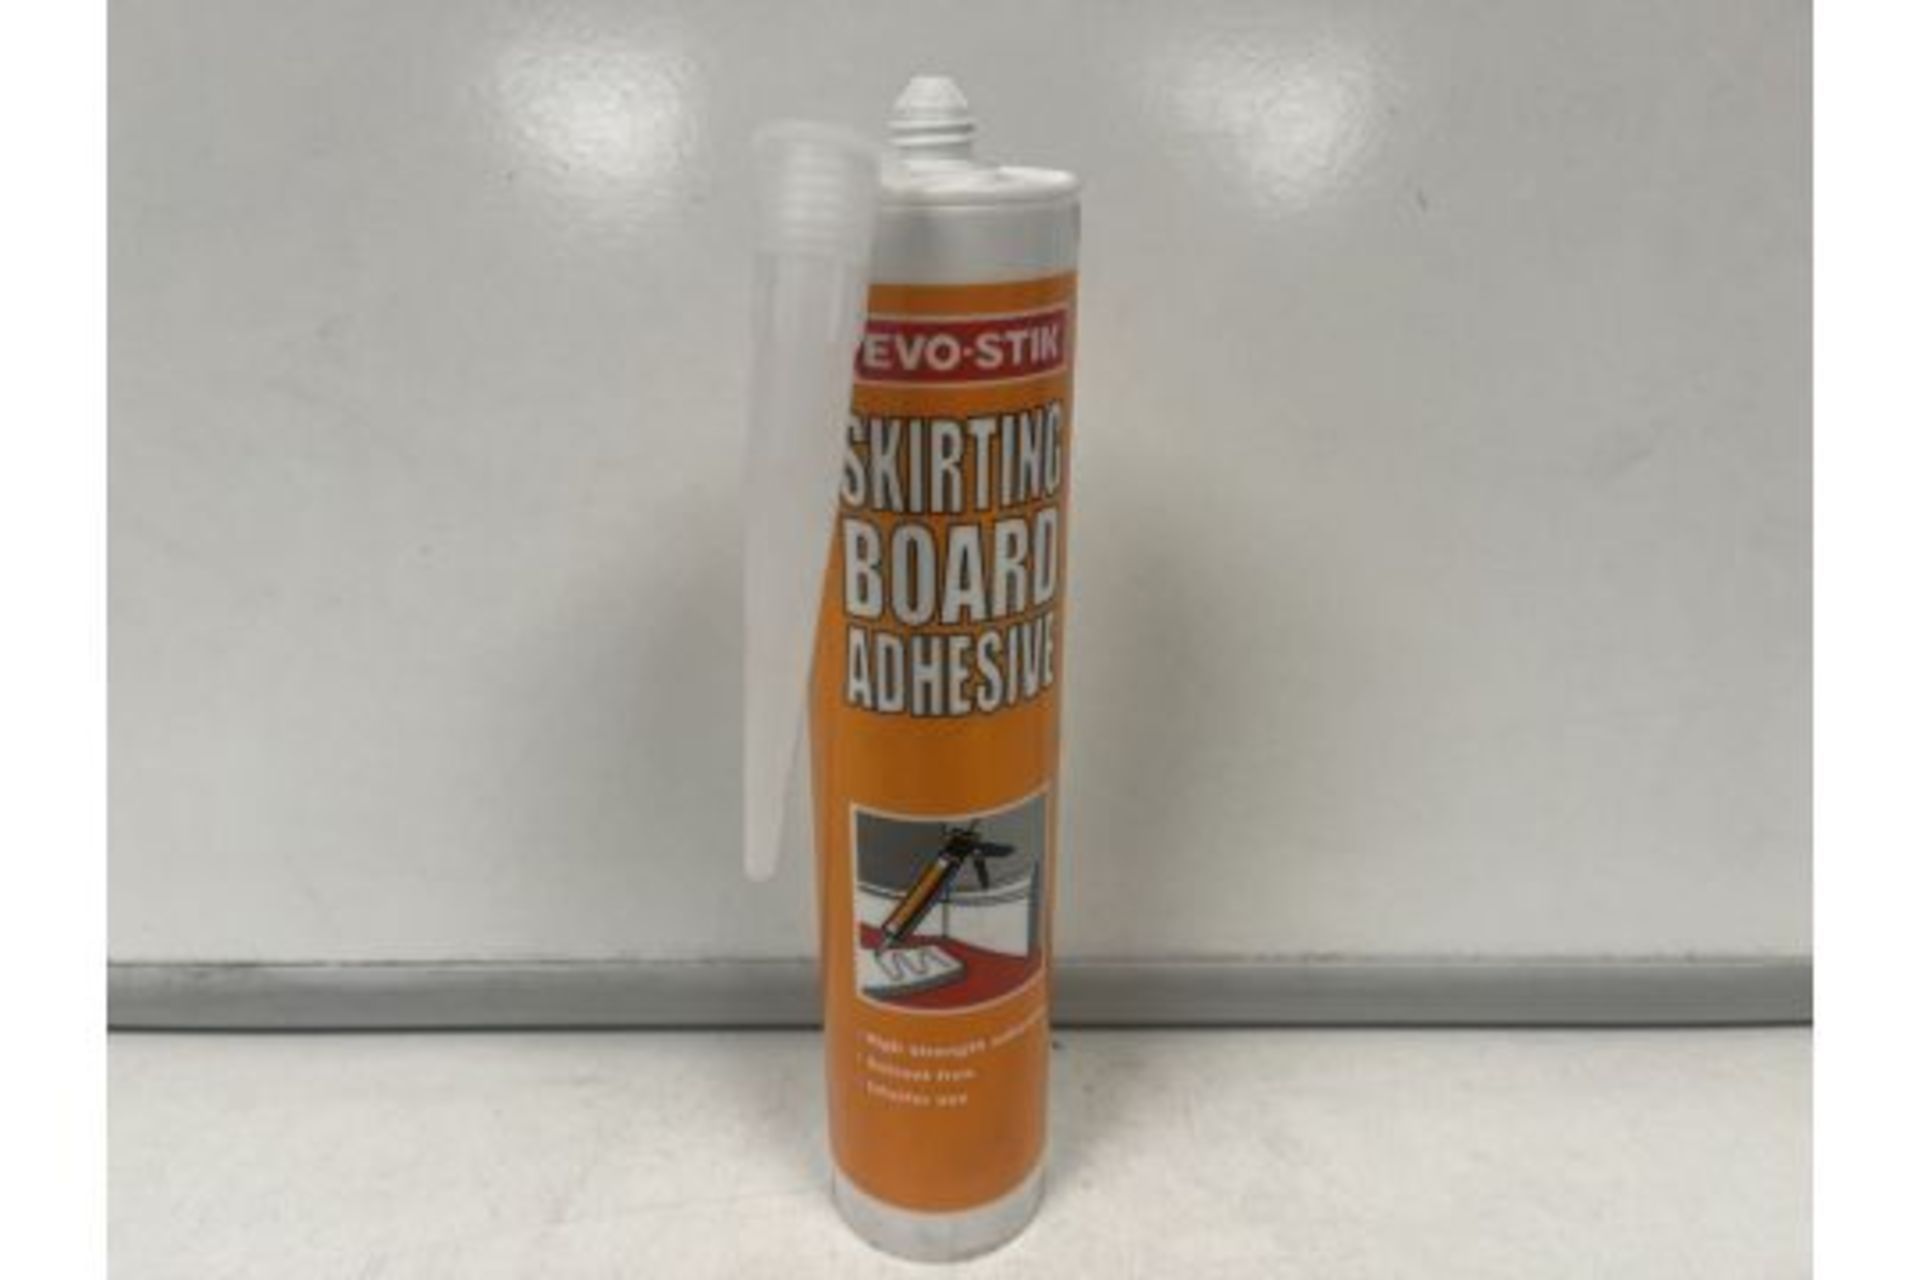 TRADE LOT 270 X BRAND NEW EVO STIK 310ML SKIRTING BOARD ADHESIVE EXP DATES BETWEEN SEP 2023 AND